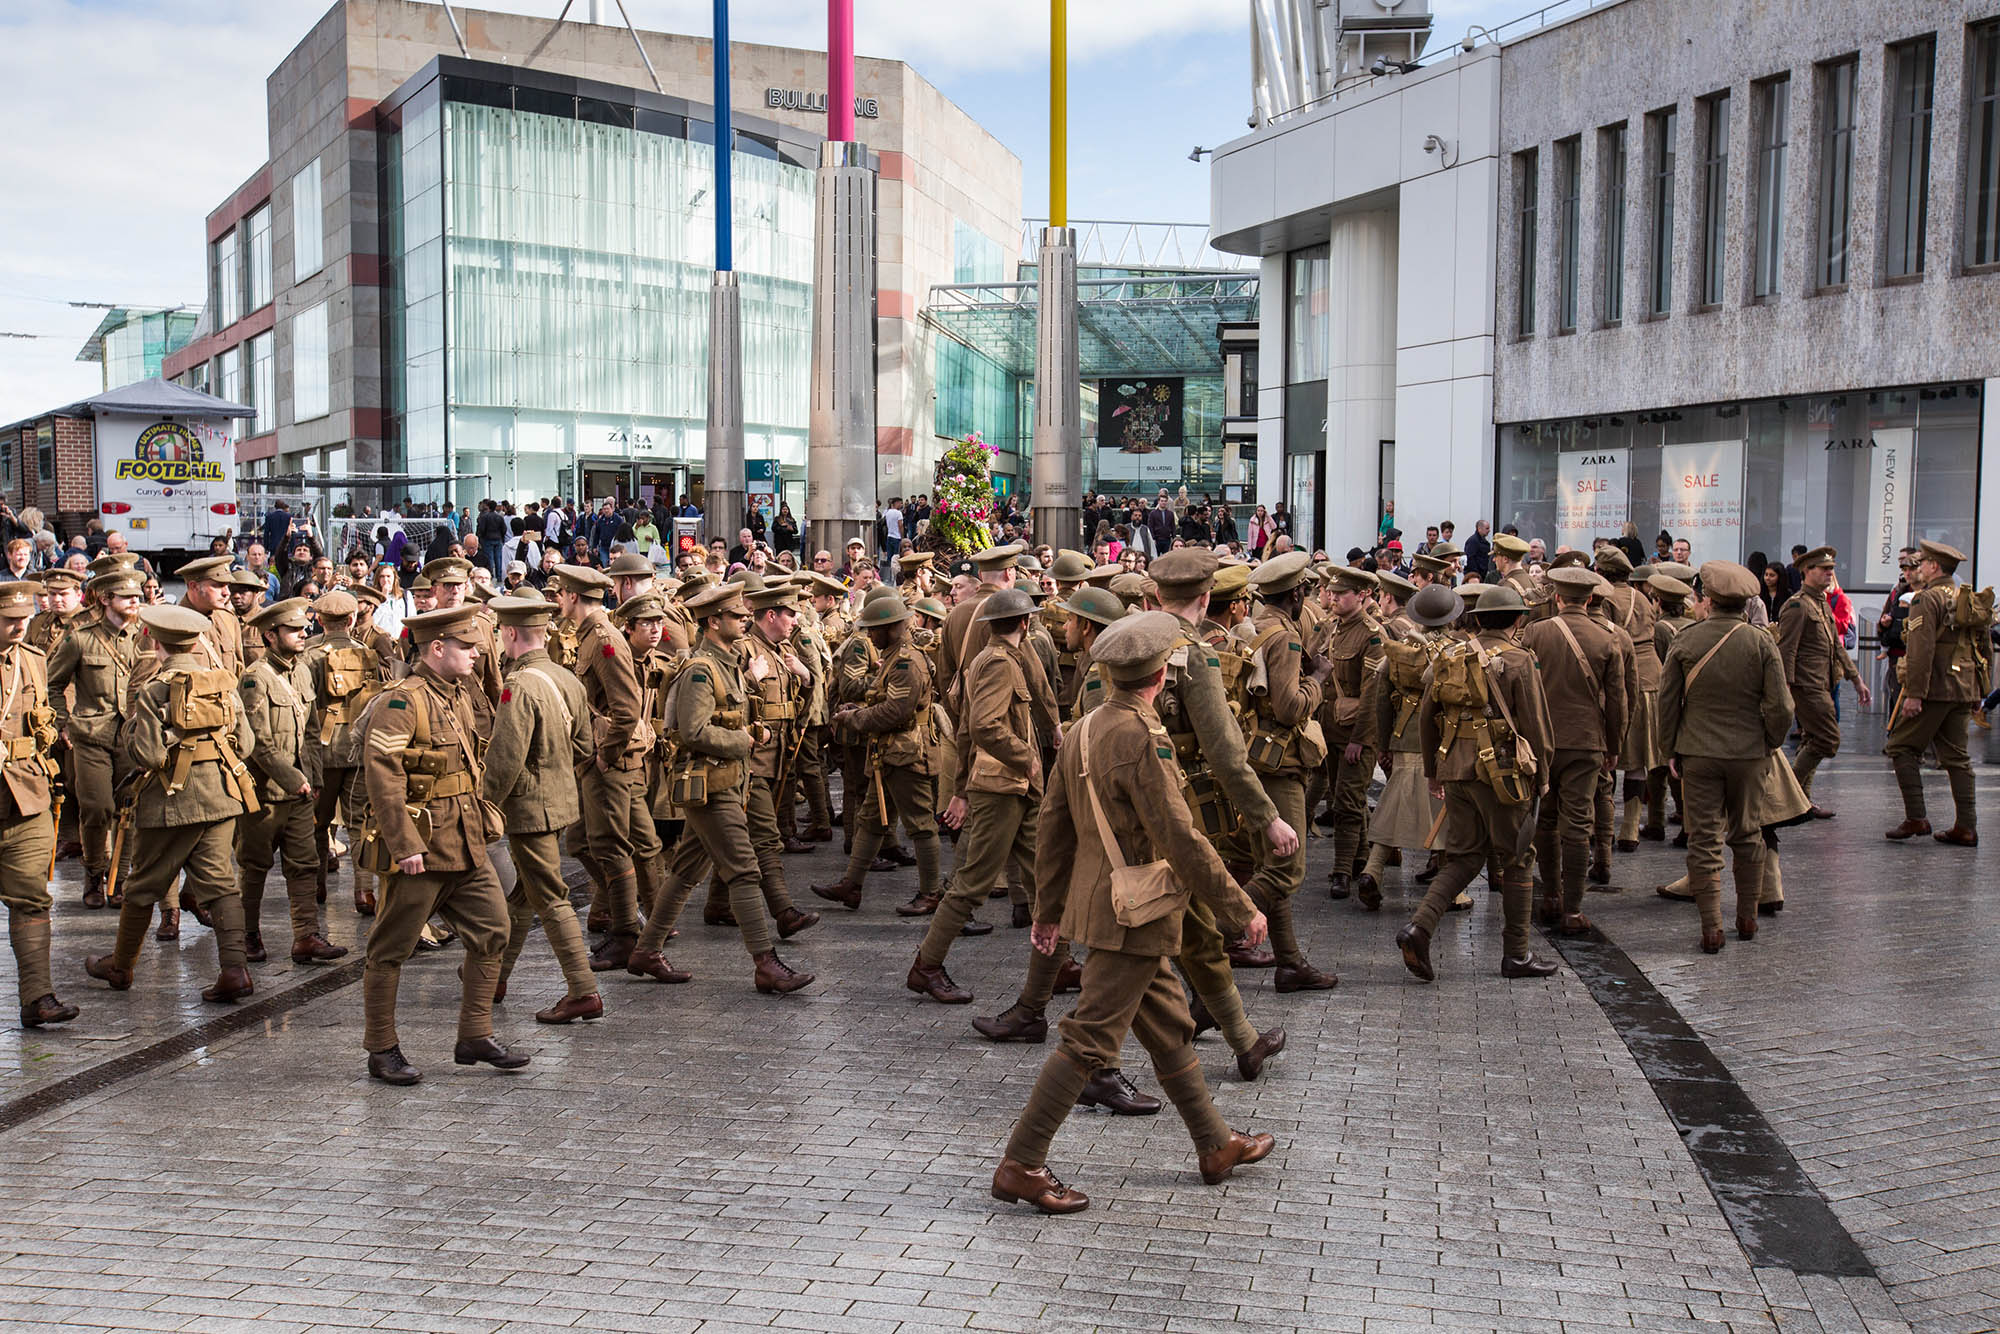  Artist Jeremy Deller’s project “We’re Here Because We’re Here” took place on 1 July 2016. Over 2000 people took part in a national memorial to mark the centenary of the first day of the Battle of the Somme. The participants, representing the shell-s